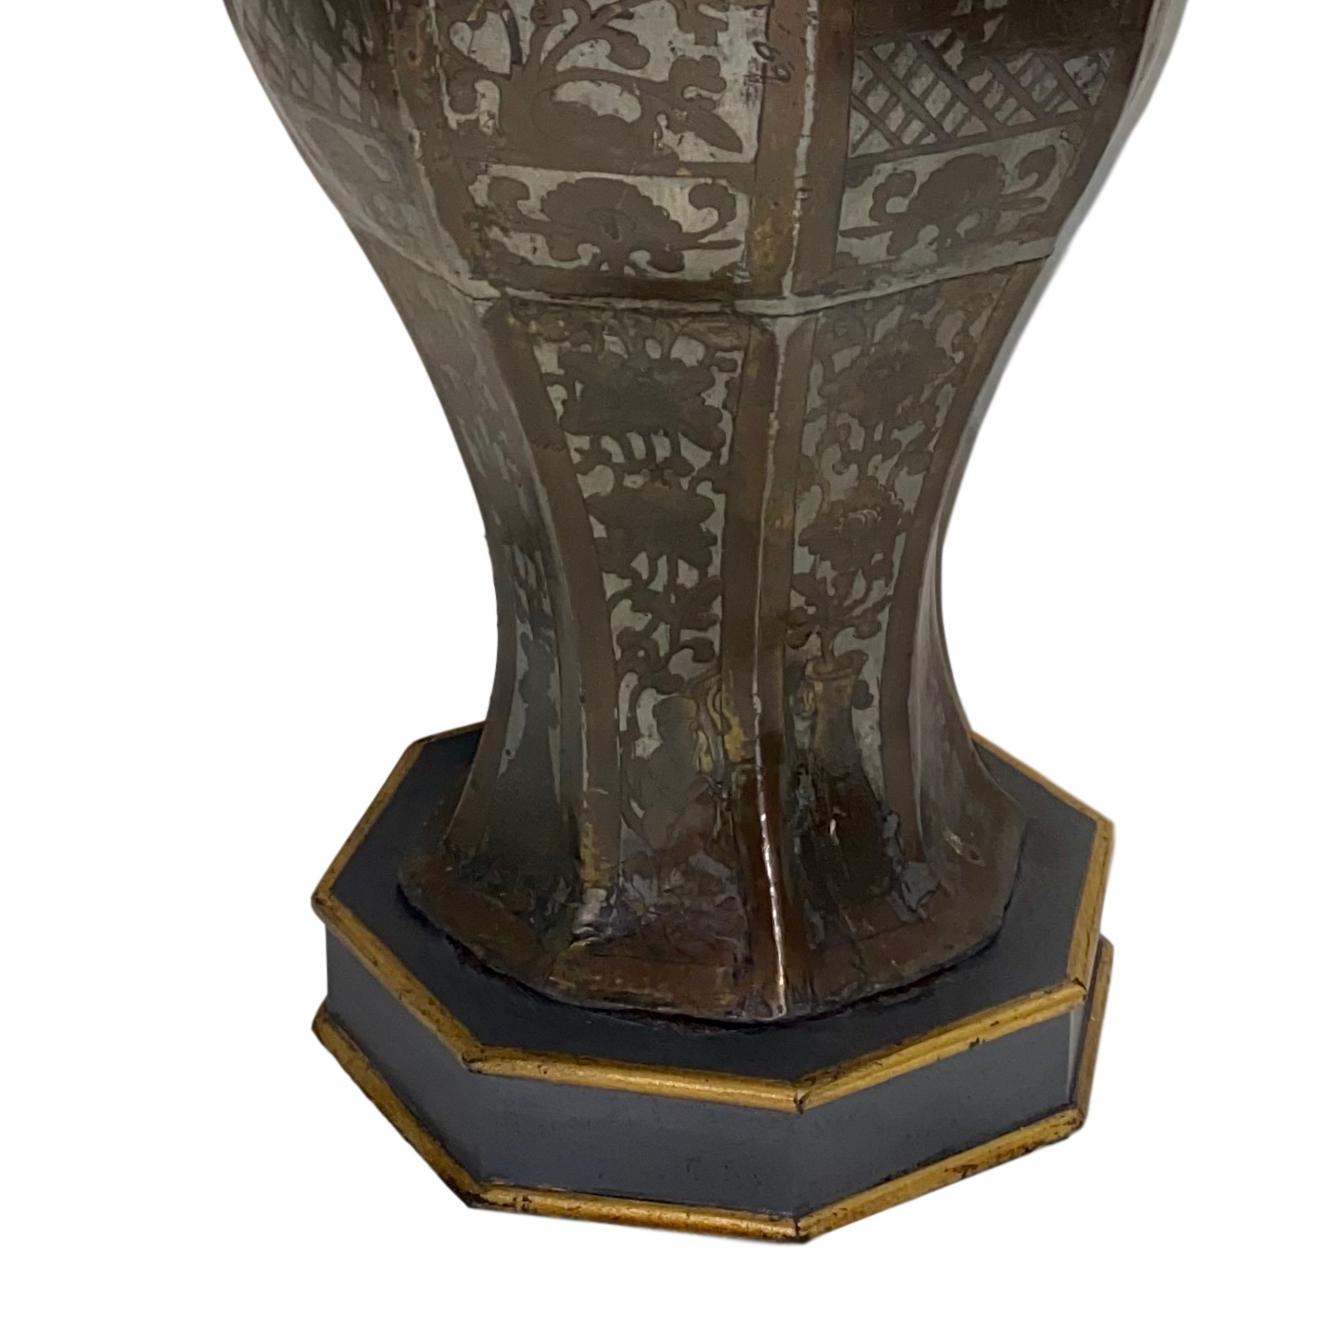 A circa 1900 Antique single English chinoiserie motif table lamp.

Measurements:
Height of body: 17.5?
Diameter: 8?.